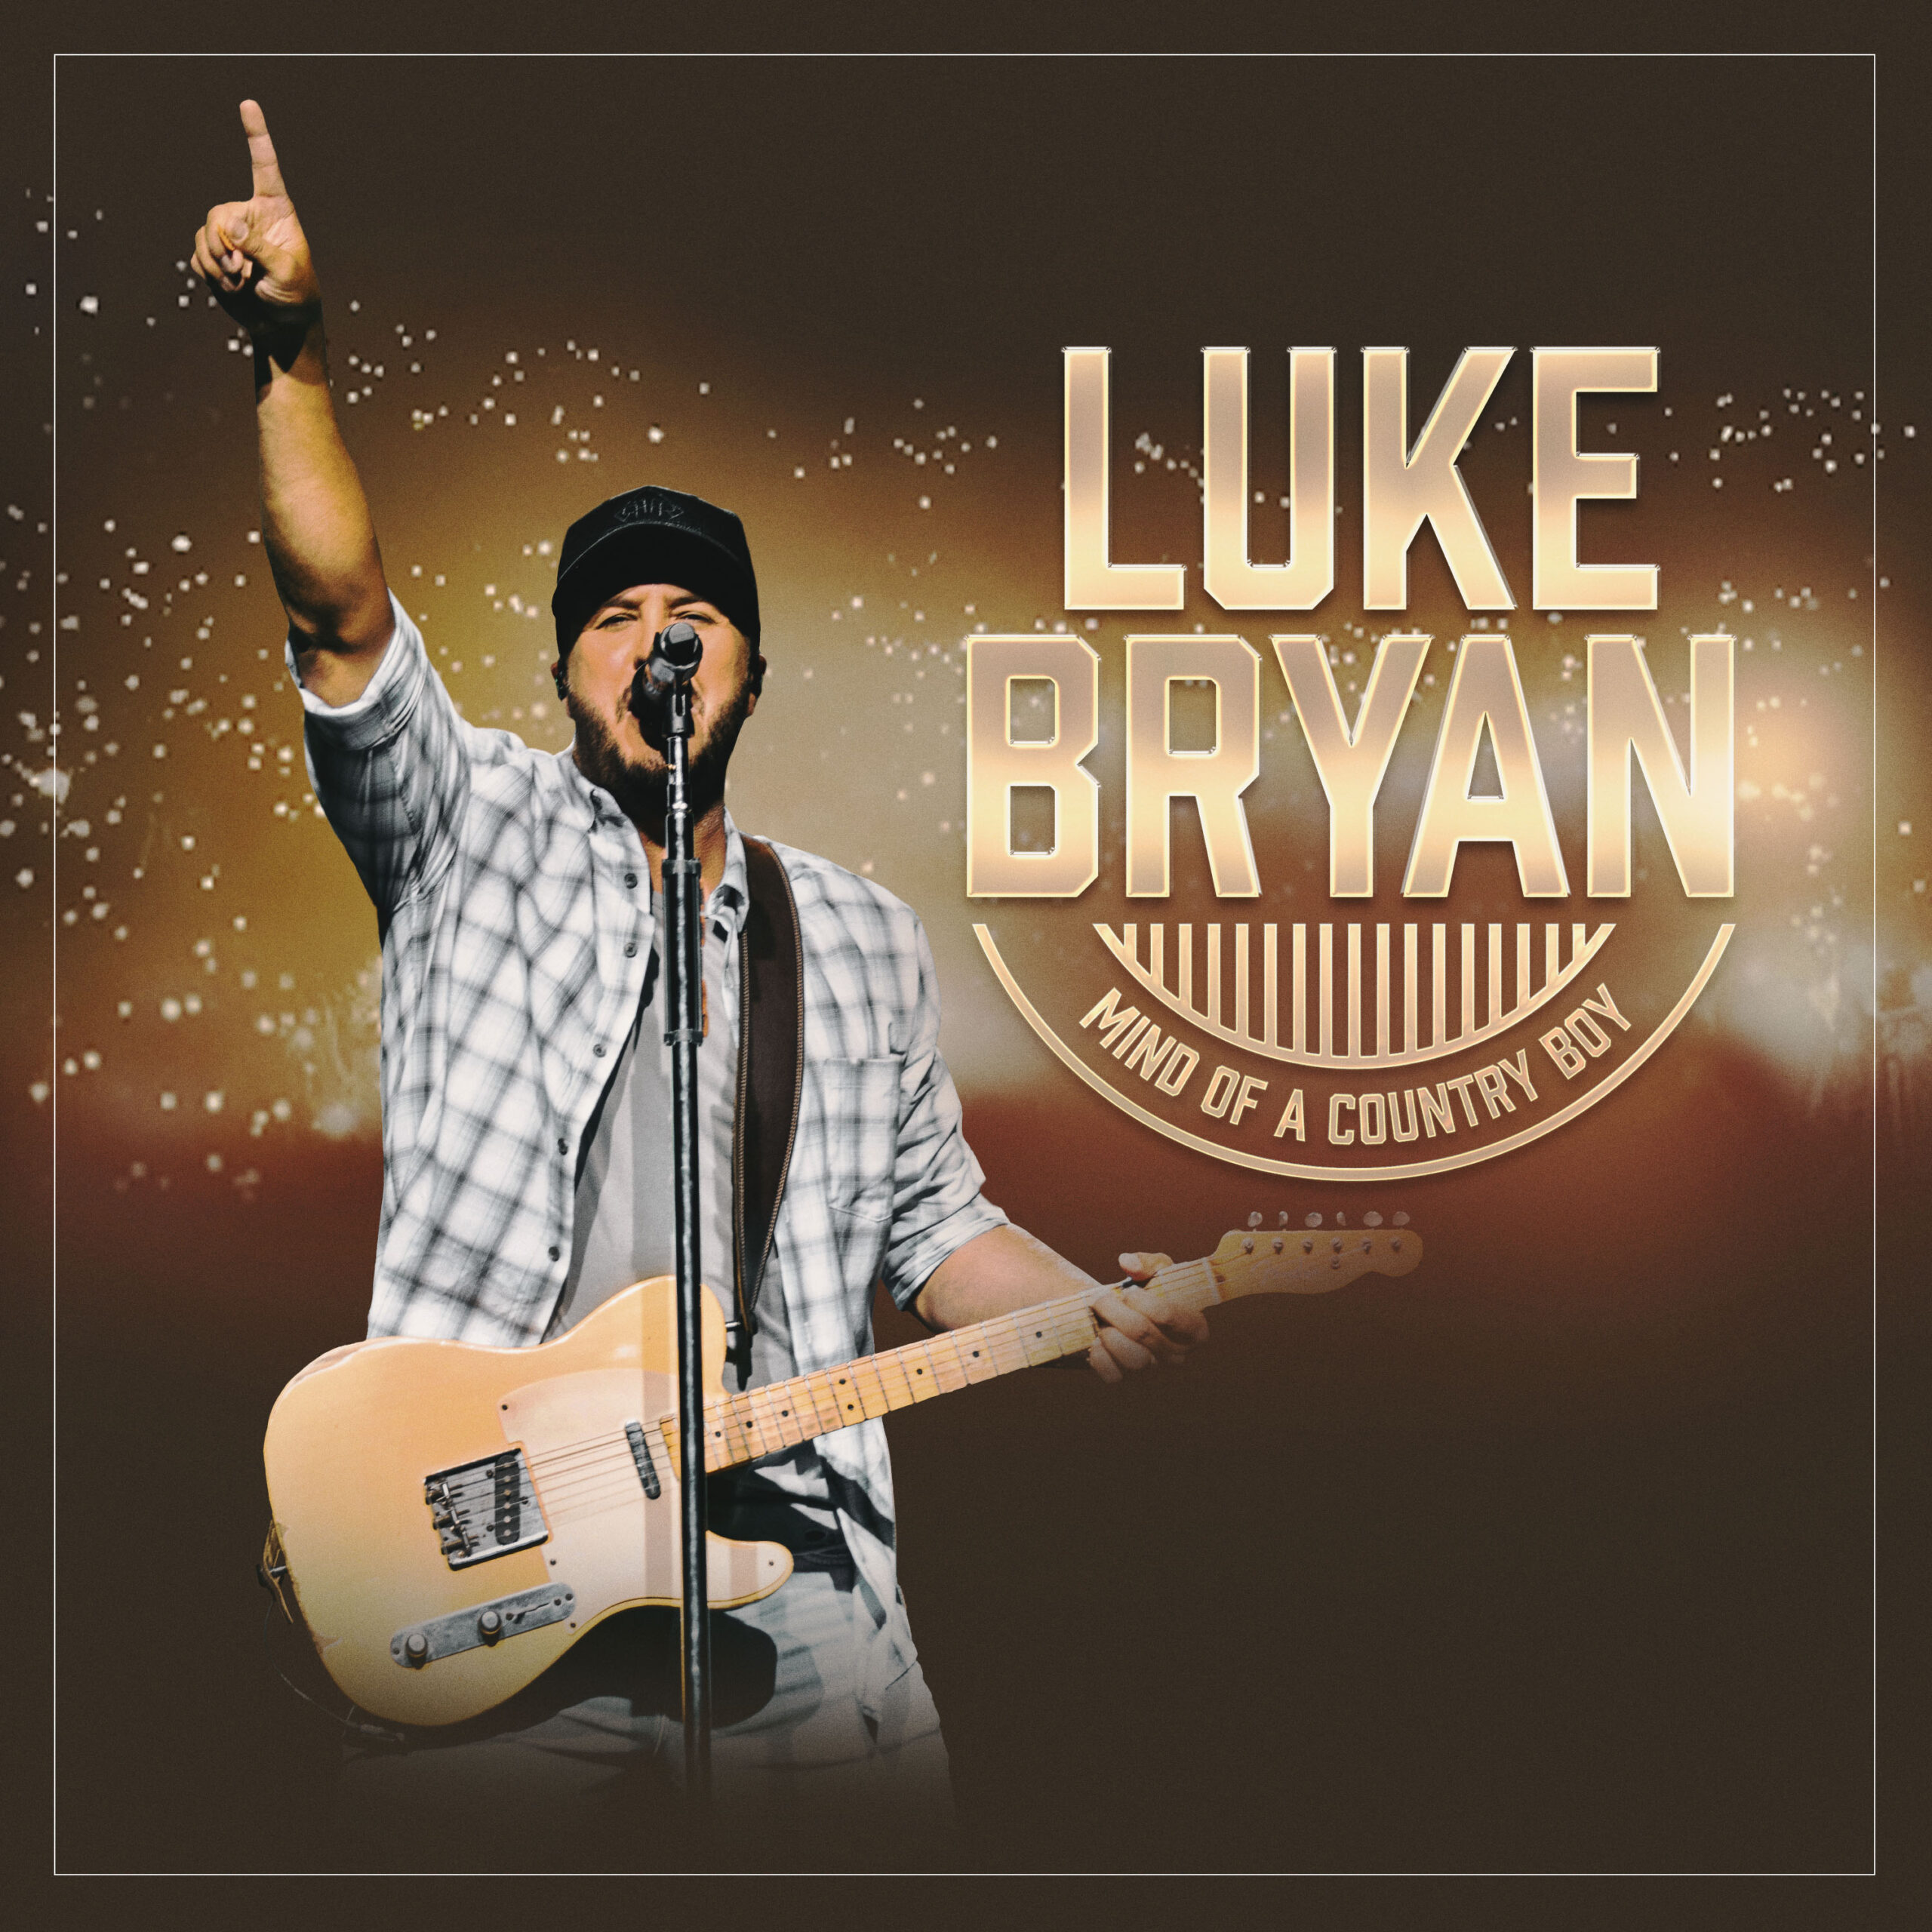 Luke Bryan Releases “Mind Of A Country Boy” Across All Digital Platforms Today